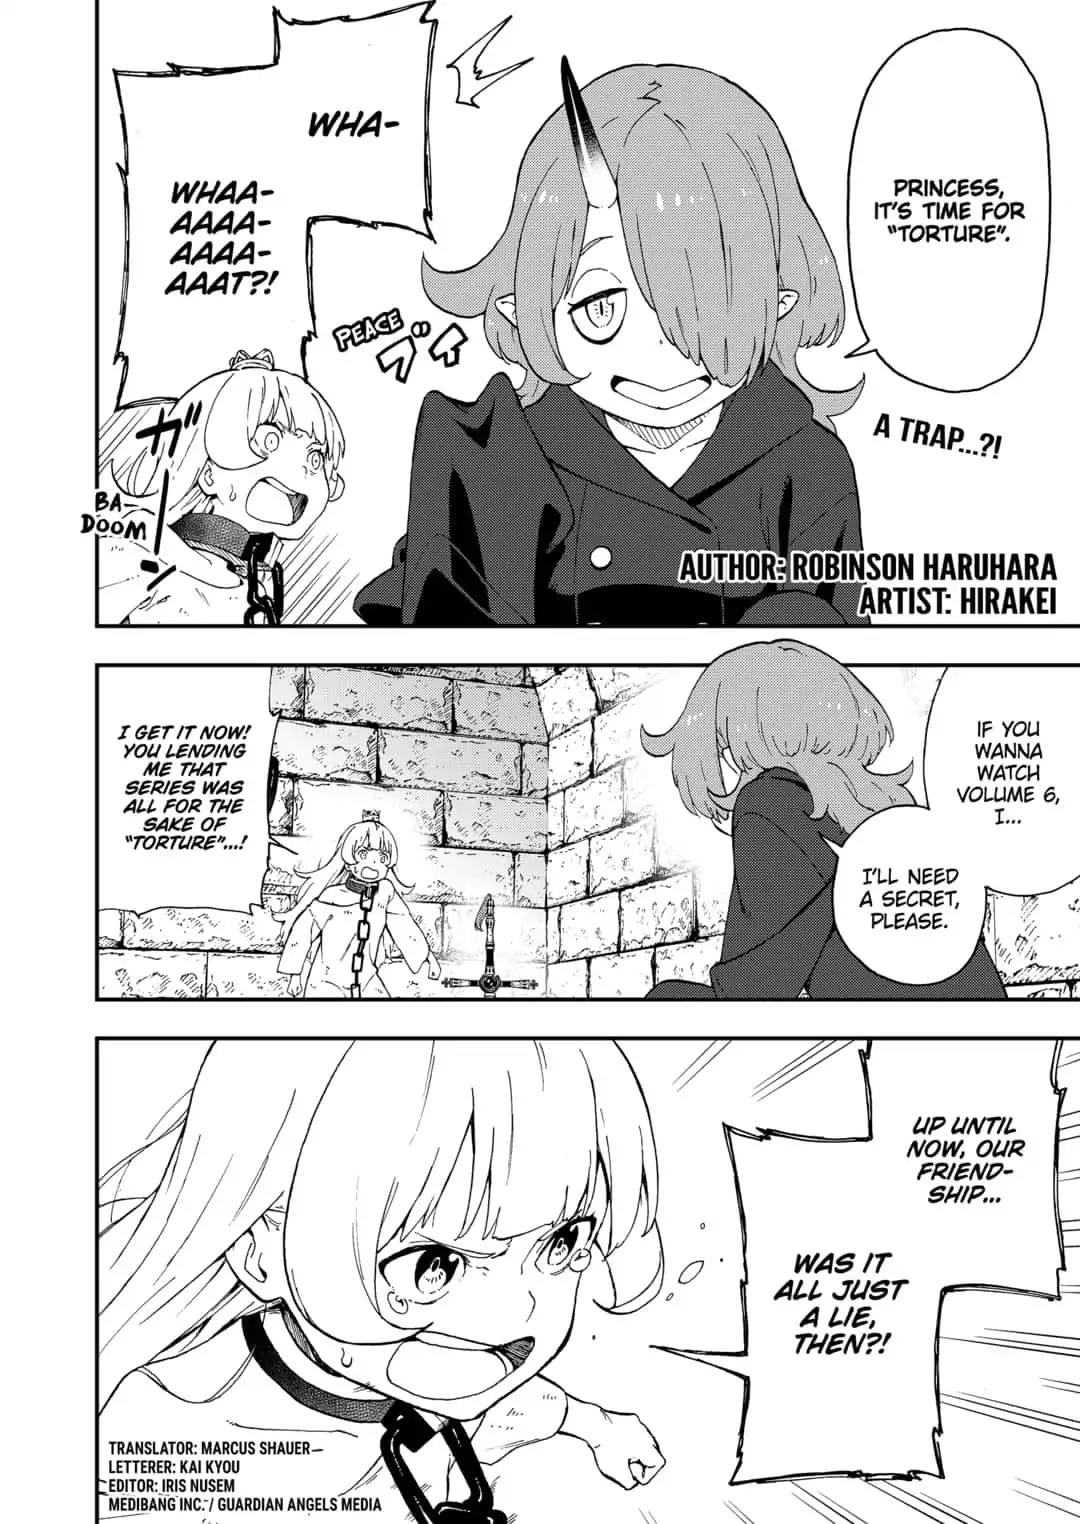 It's Time for "Interrogation," Princess! Chapter 25